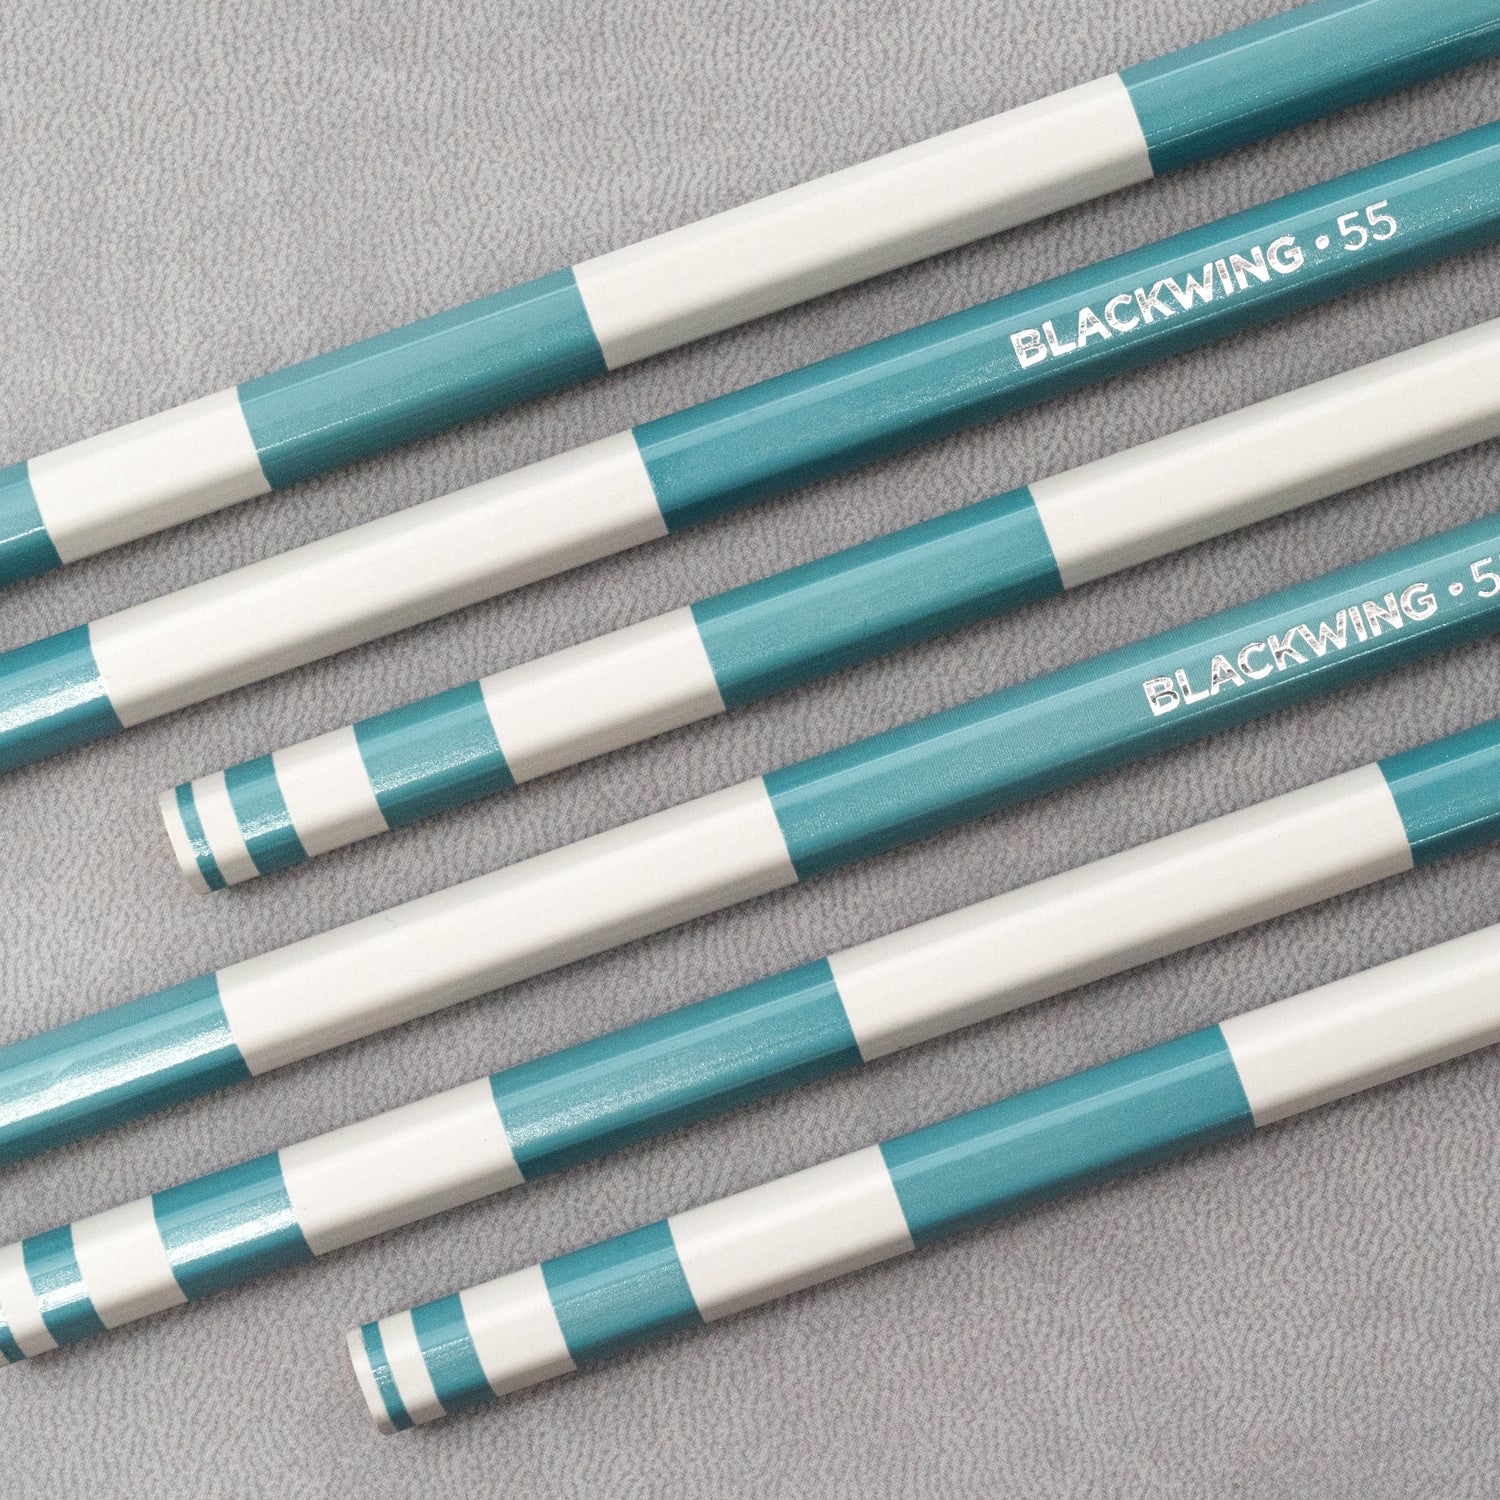 Five Blackwing Volume 55 (Set of 12) pencils on a gray surface, showcasing perfect symmetry.